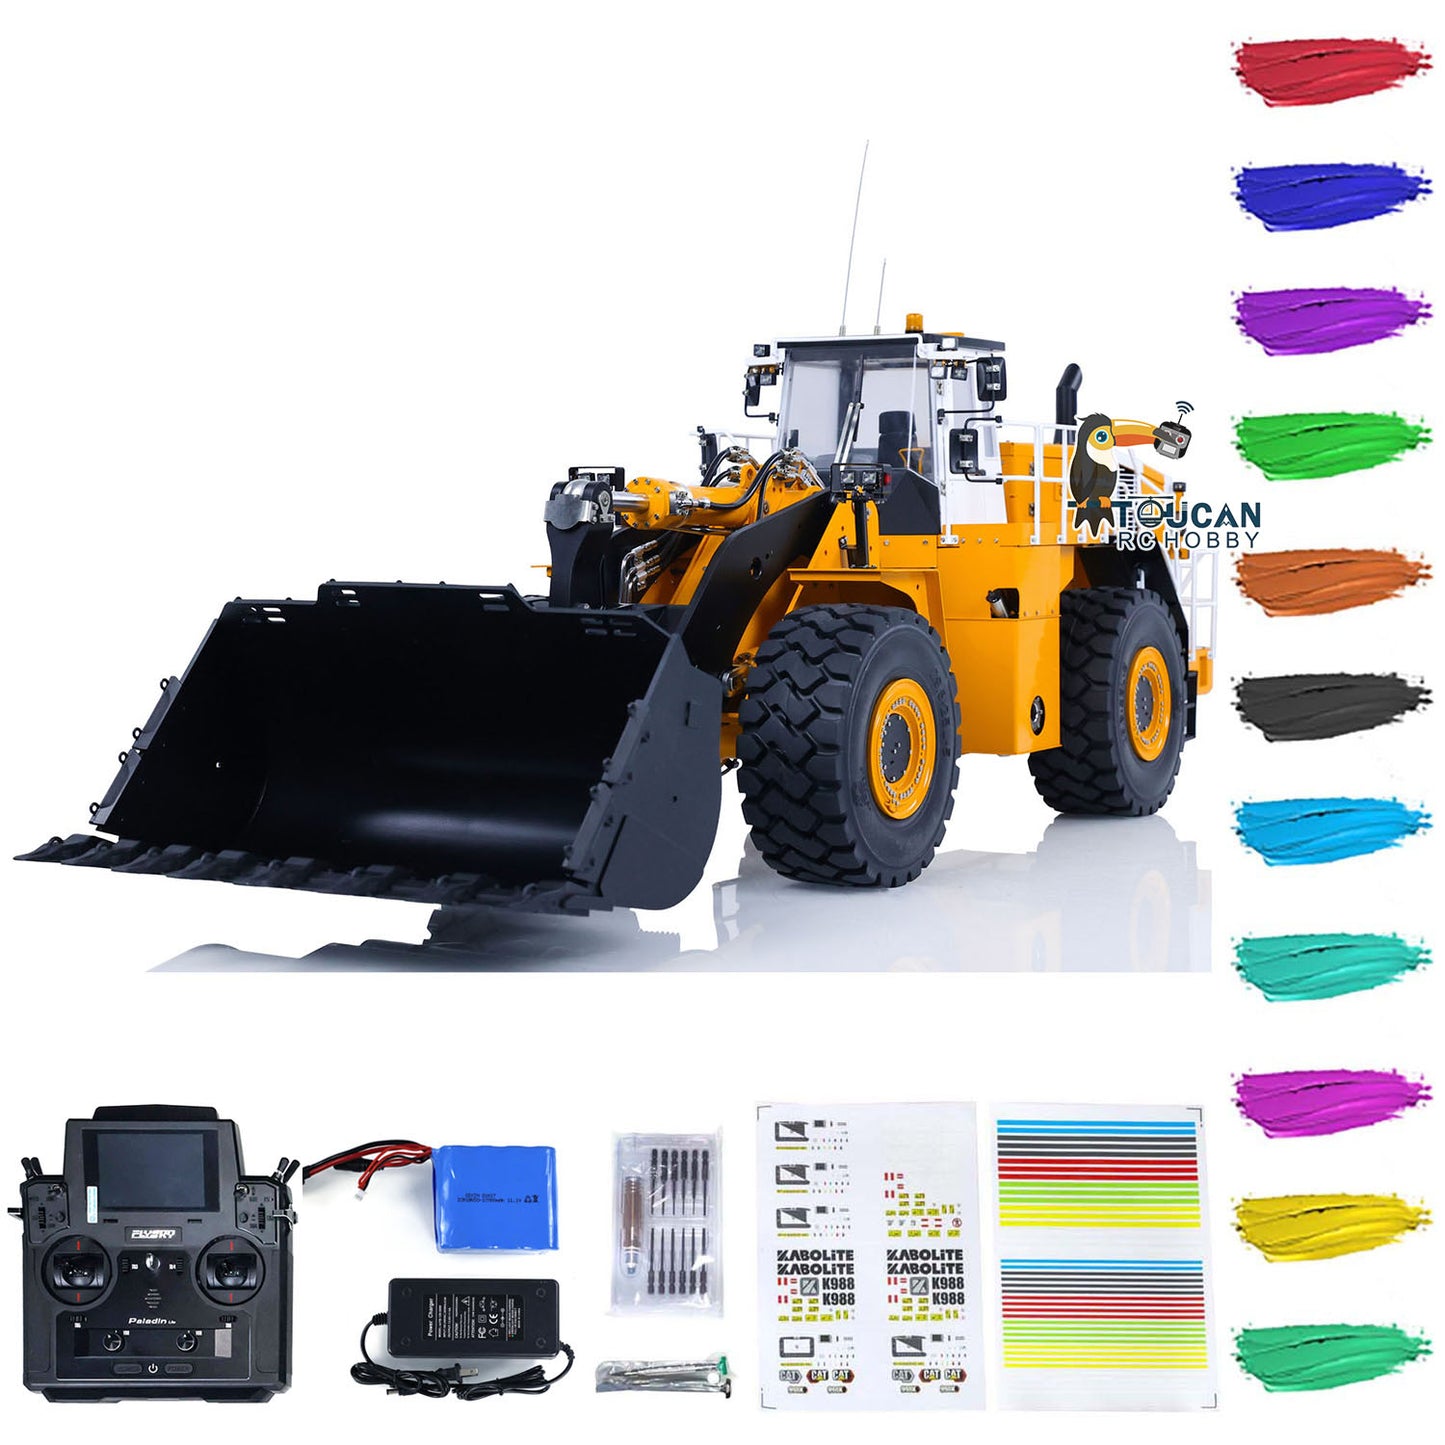 IN STOCK Kabolite K988 1/14 Hydraulic RC Loader PL18 Lite Radio Control Construction Vehicle Simulation Car RTR Painted Assembled Model